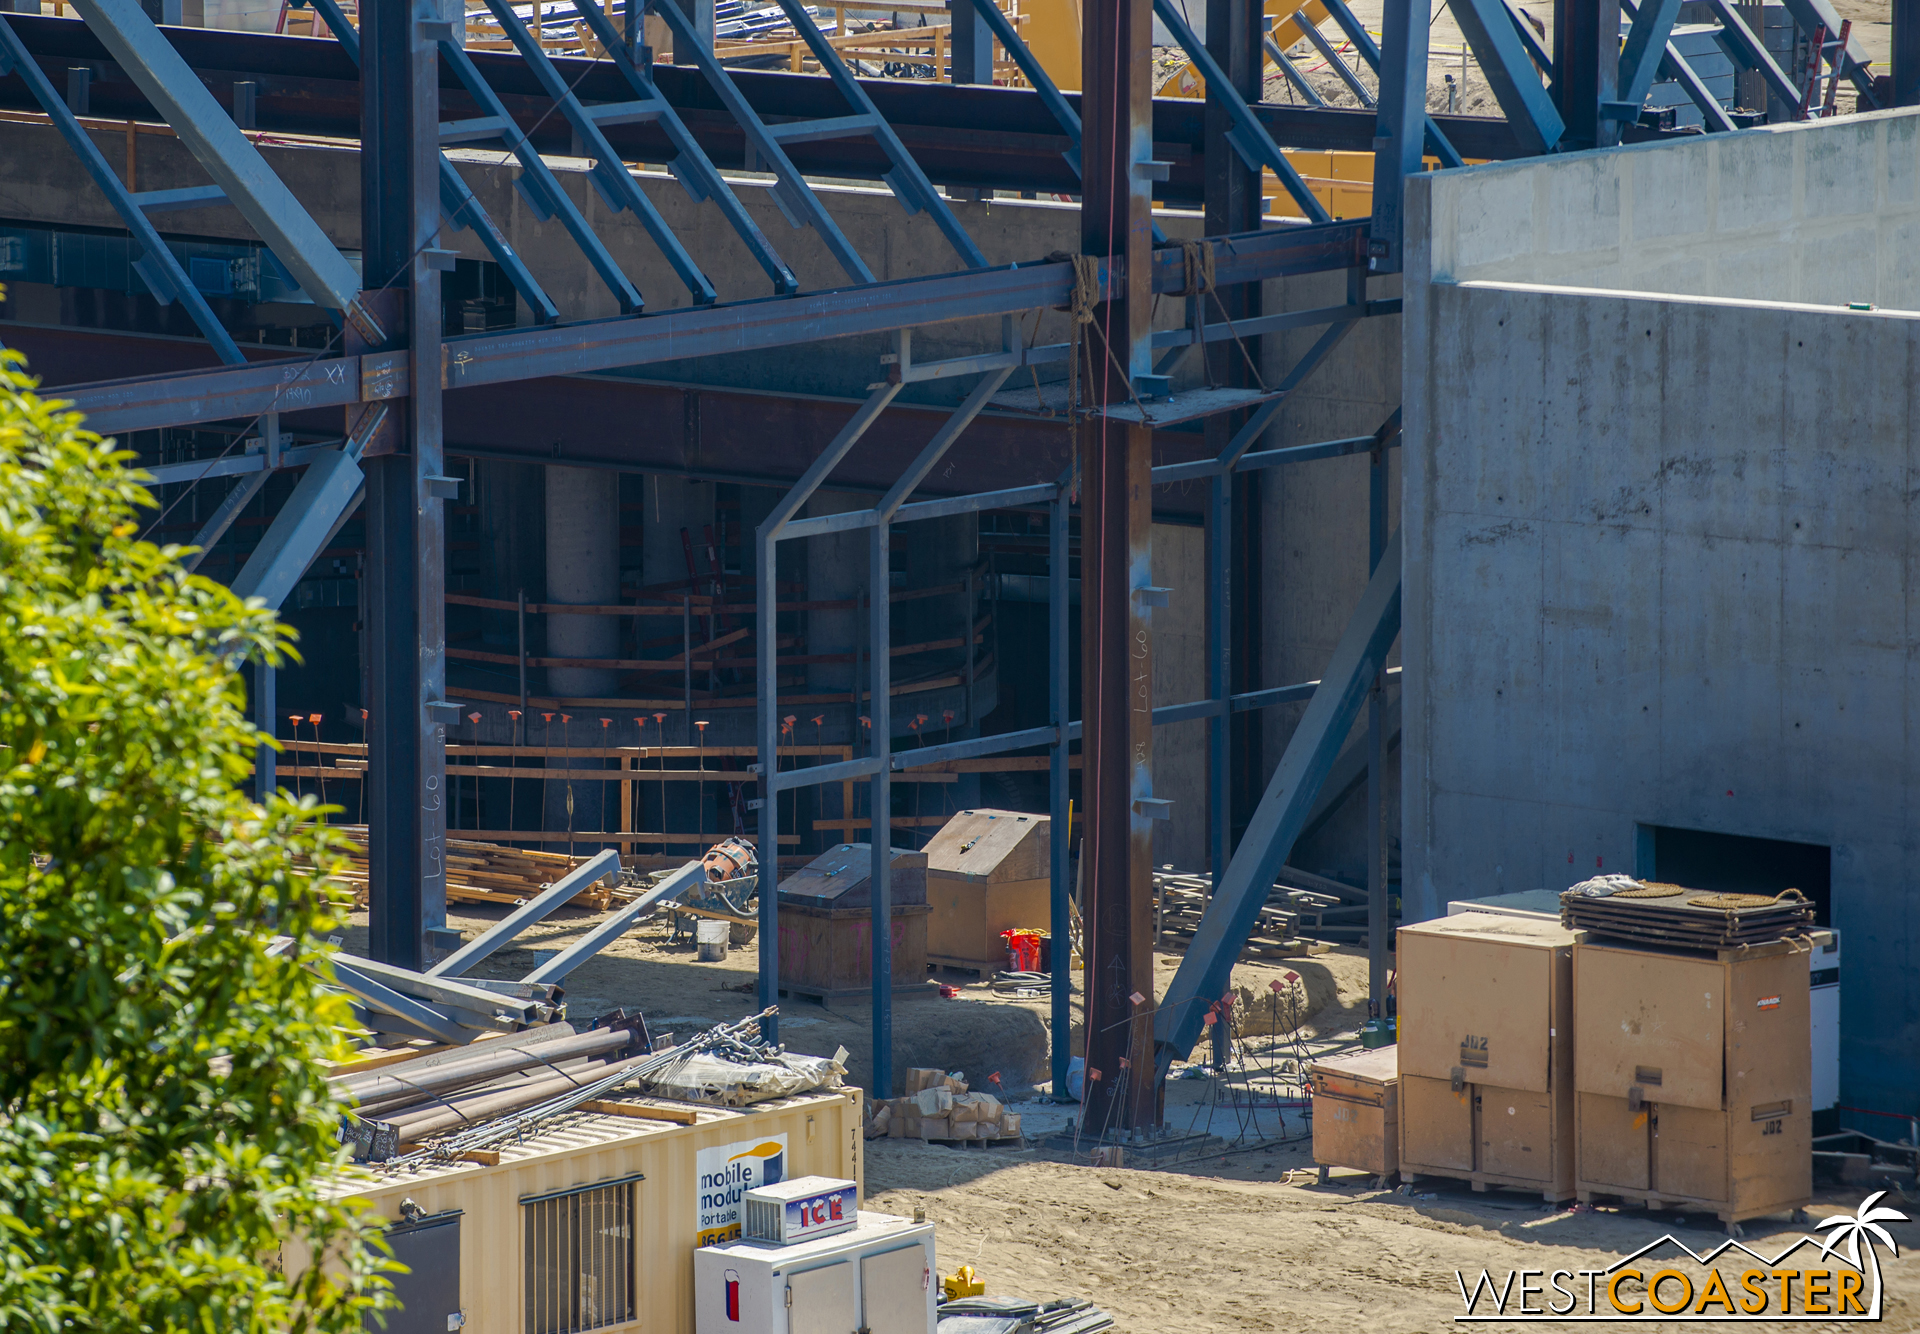  There's speculation that the columned area within could house the loading area of the ride, which would take riders into the main hangar space as one of the first scenes.&nbsp; I have absolutely no idea whether this is completely off the mark or not